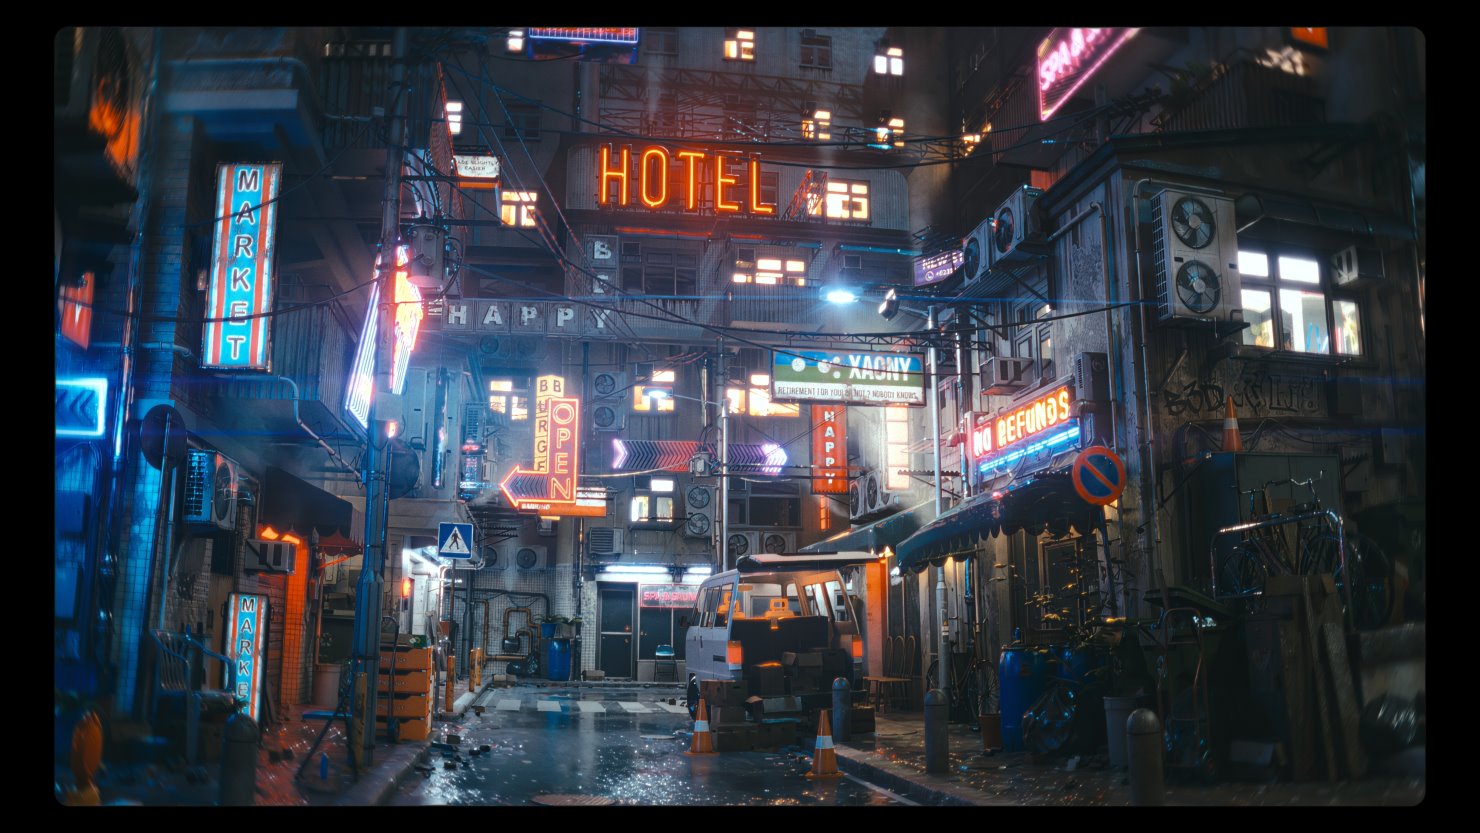 Rainy alleyway at night with neon signs